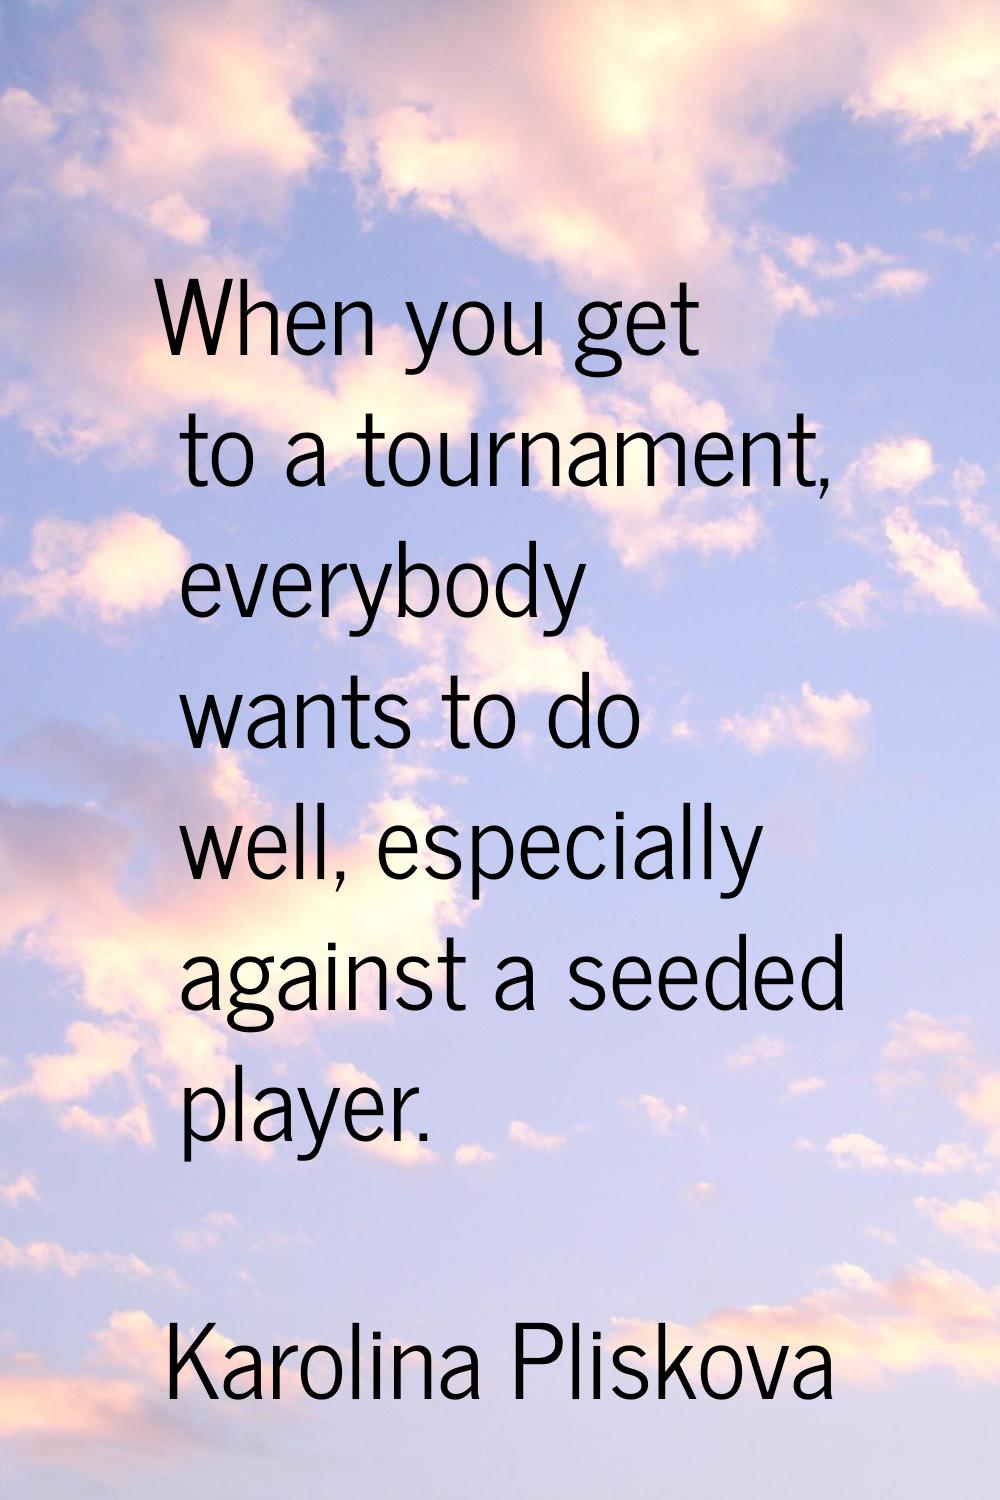 When you get to a tournament, everybody wants to do well, especially against a seeded player.